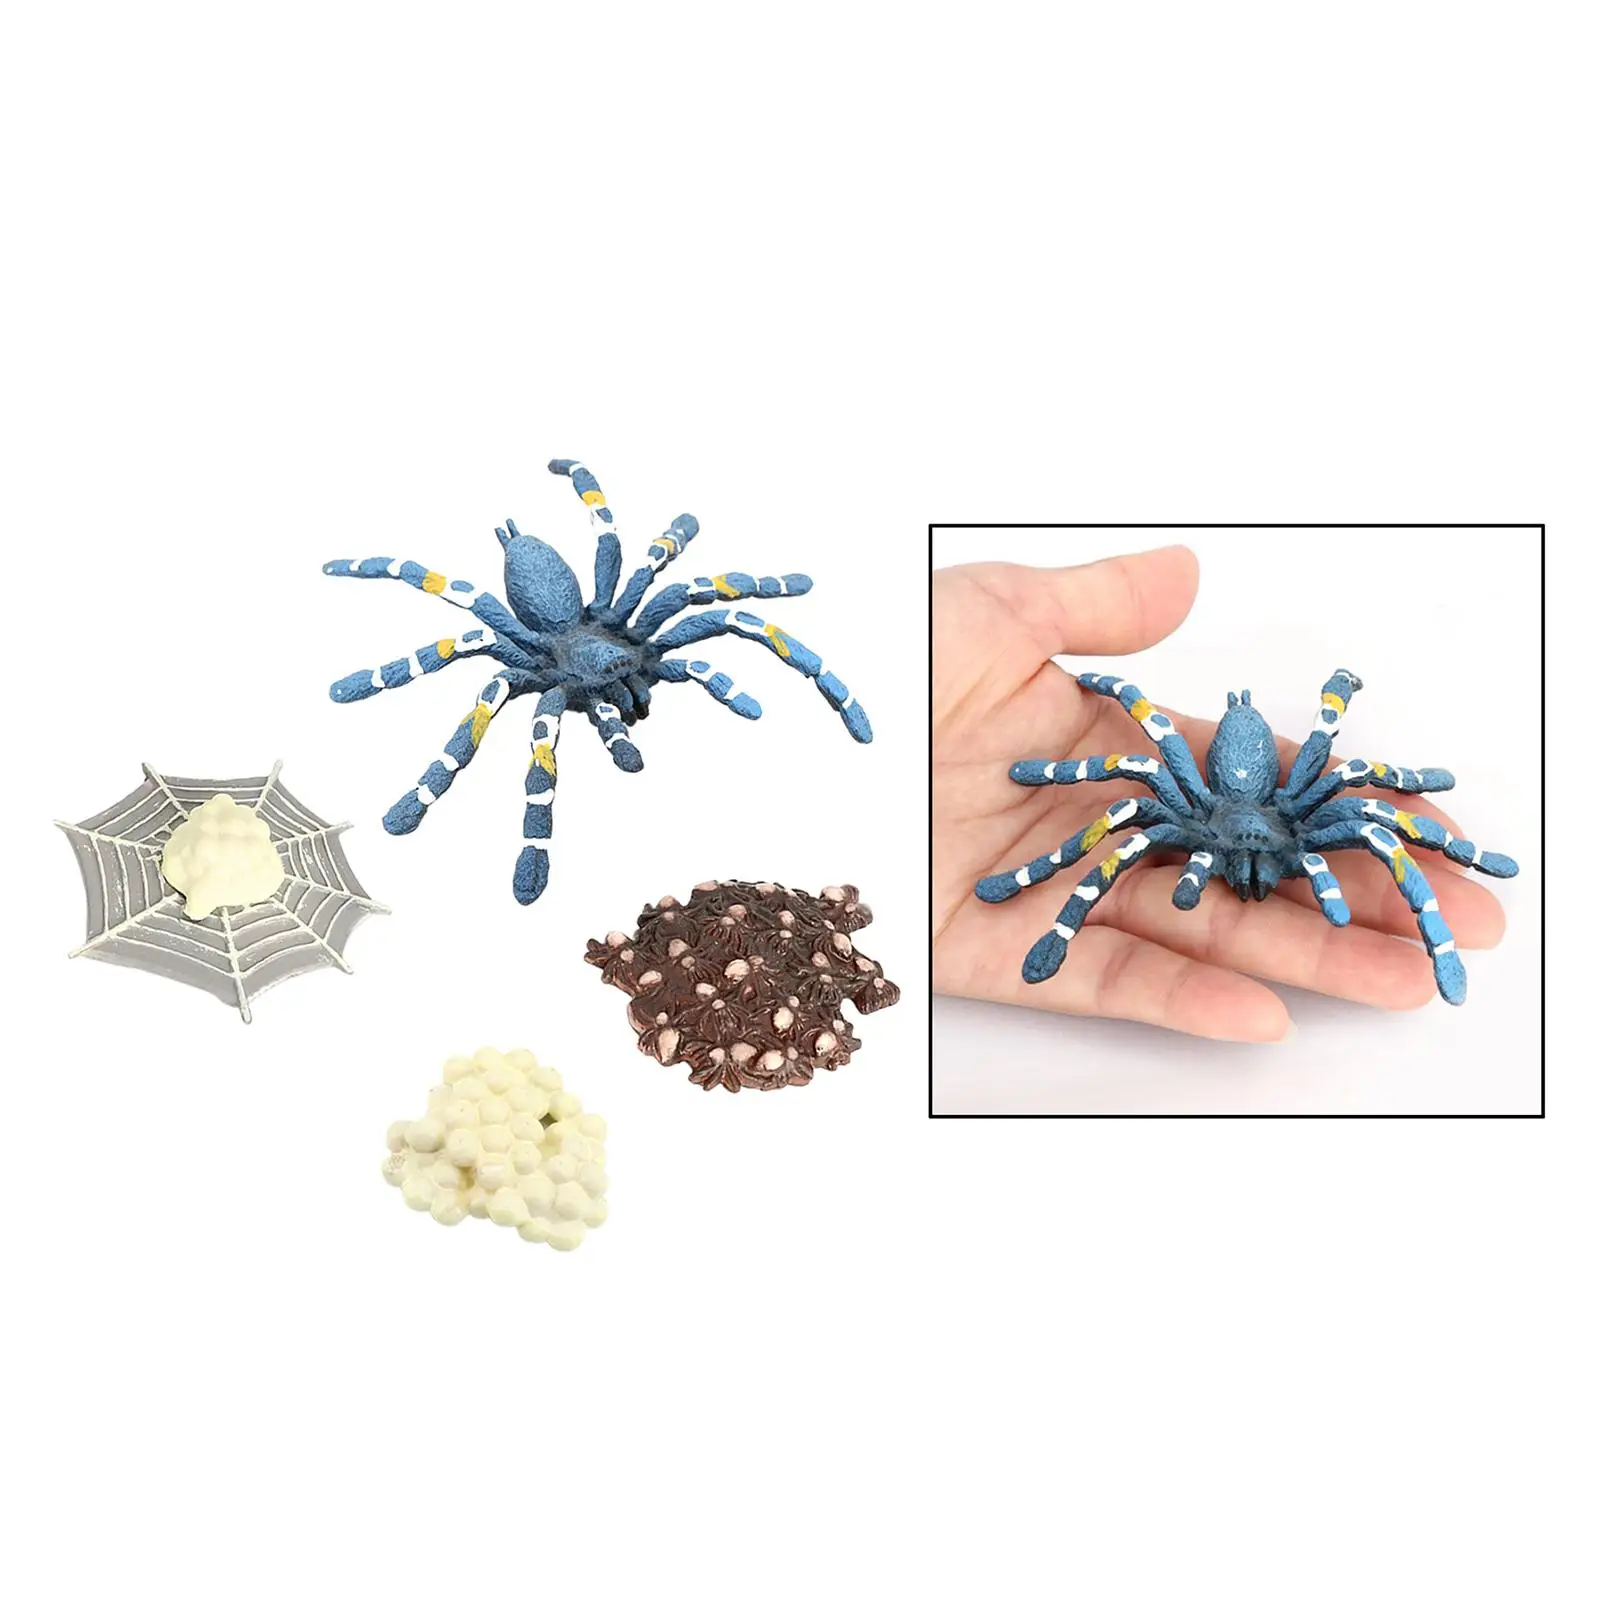 4 Stages Life Cycle of a Bird Eating Spider Nature Insects Life Cycles Growth Model Game Prop Insect Animal Natural Toy